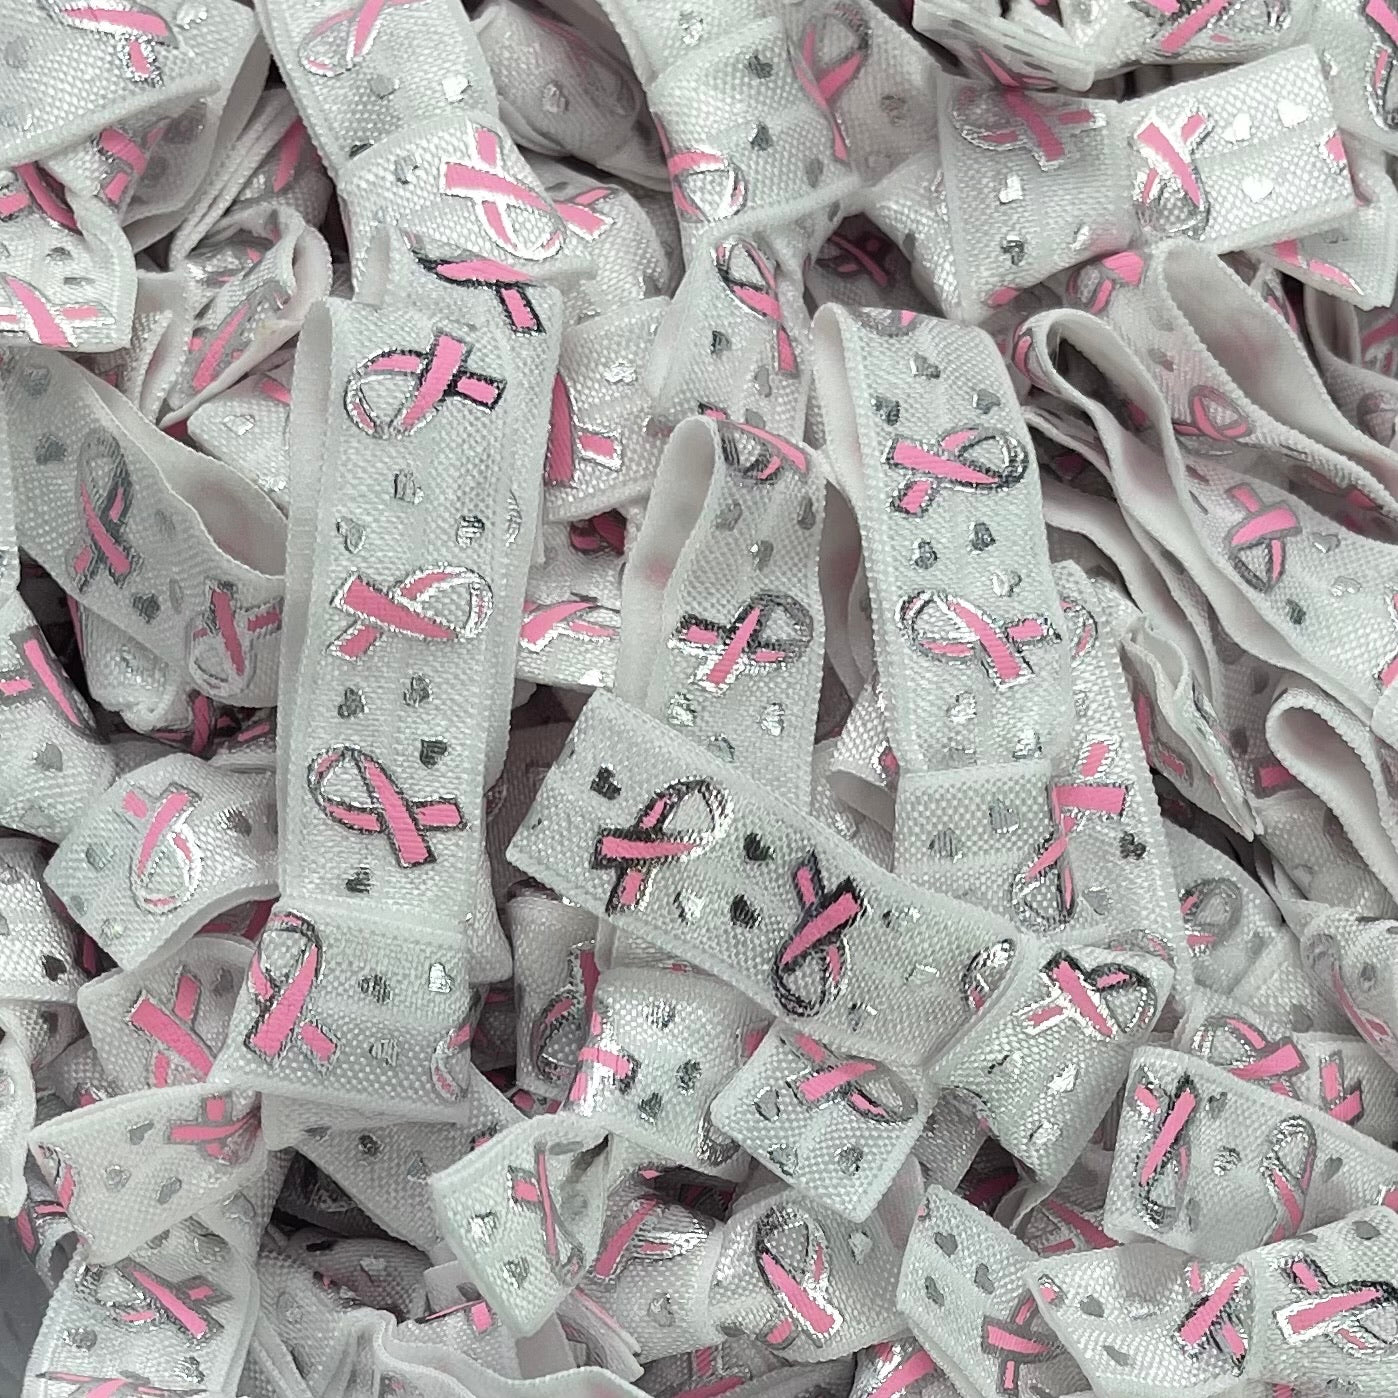 White Breast Cancer Awareness Hair Tie